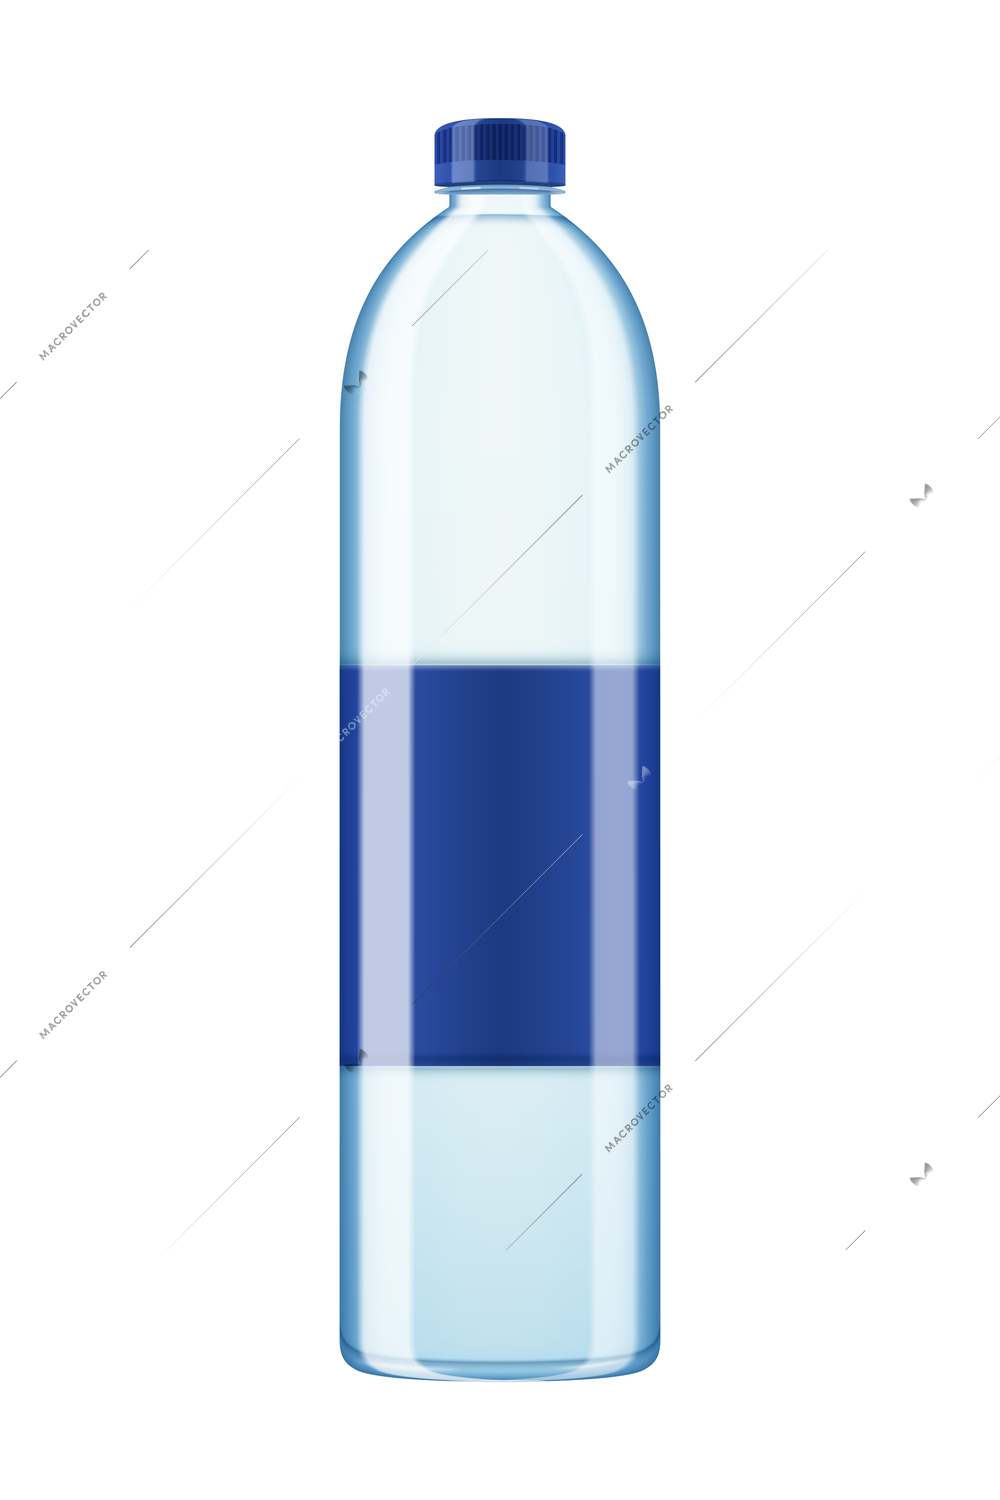 Realistic mineral water bottle composition with isolated image of plastic water bottle on blank background vector illustration